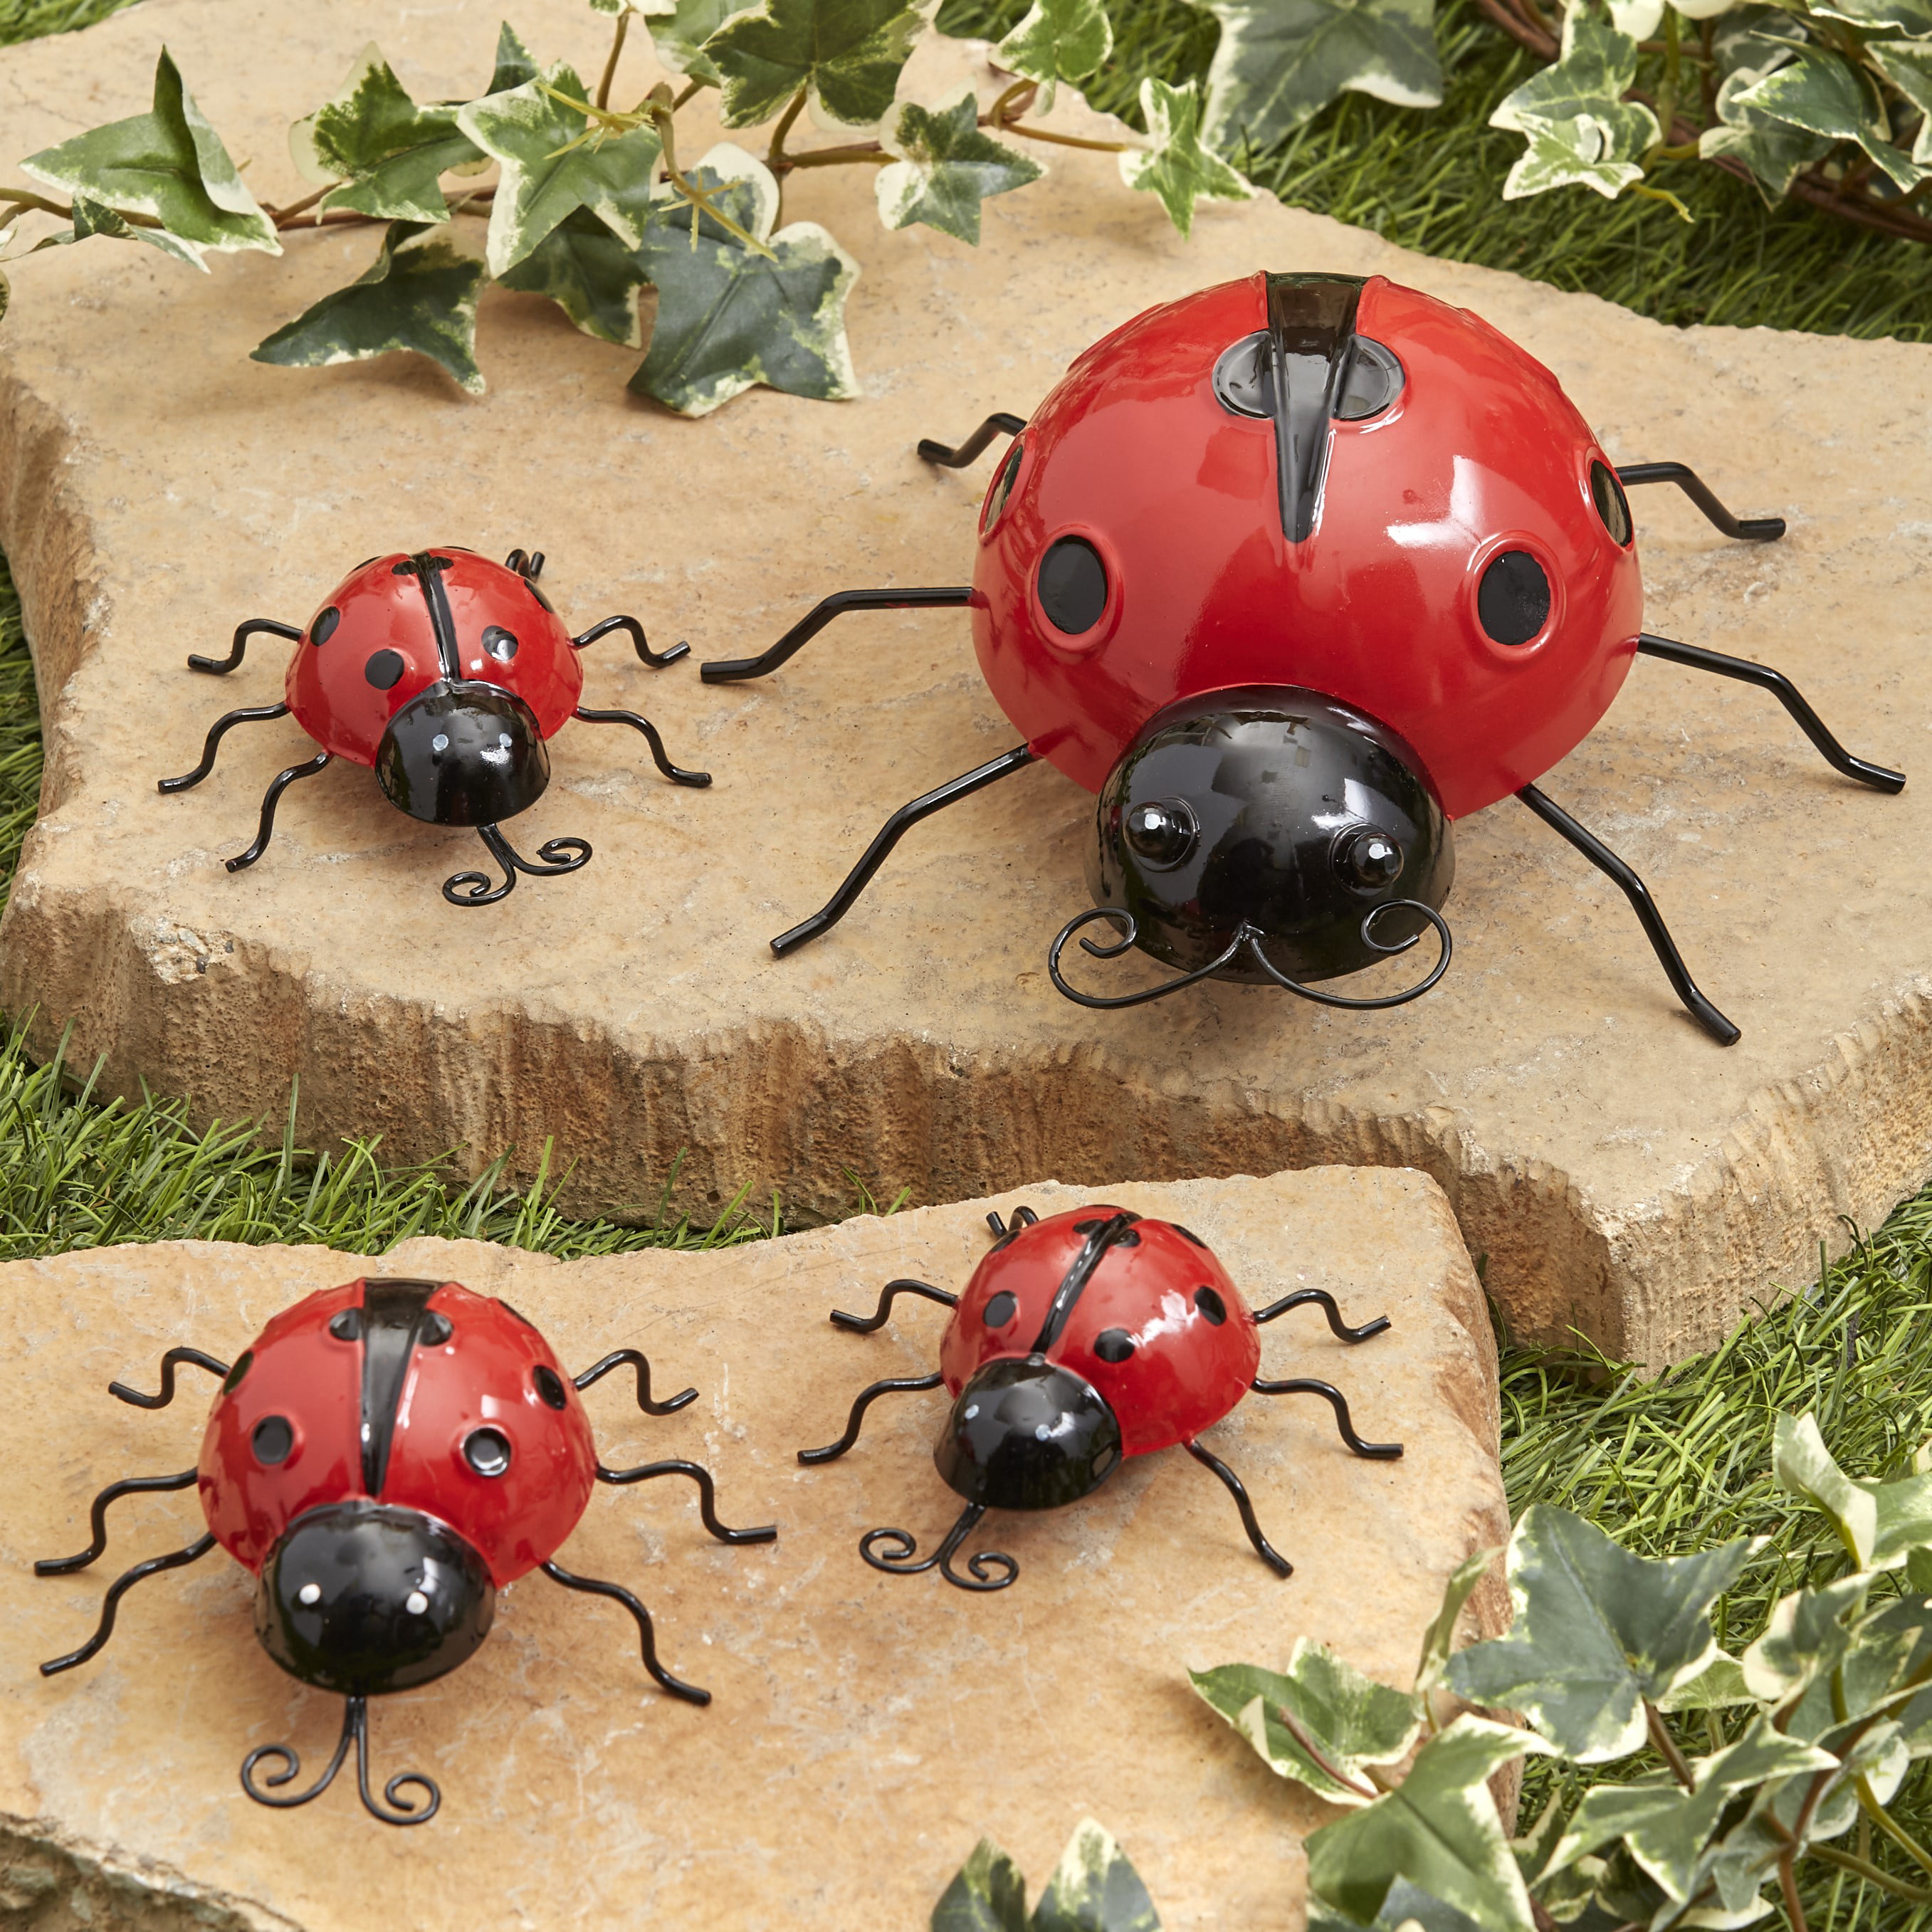 Steel Ladybird Figurine with Solar Powered Animal Lights for Garden Patio and Lawn Decor and Yard ornaments Metal Garden Art Decoration